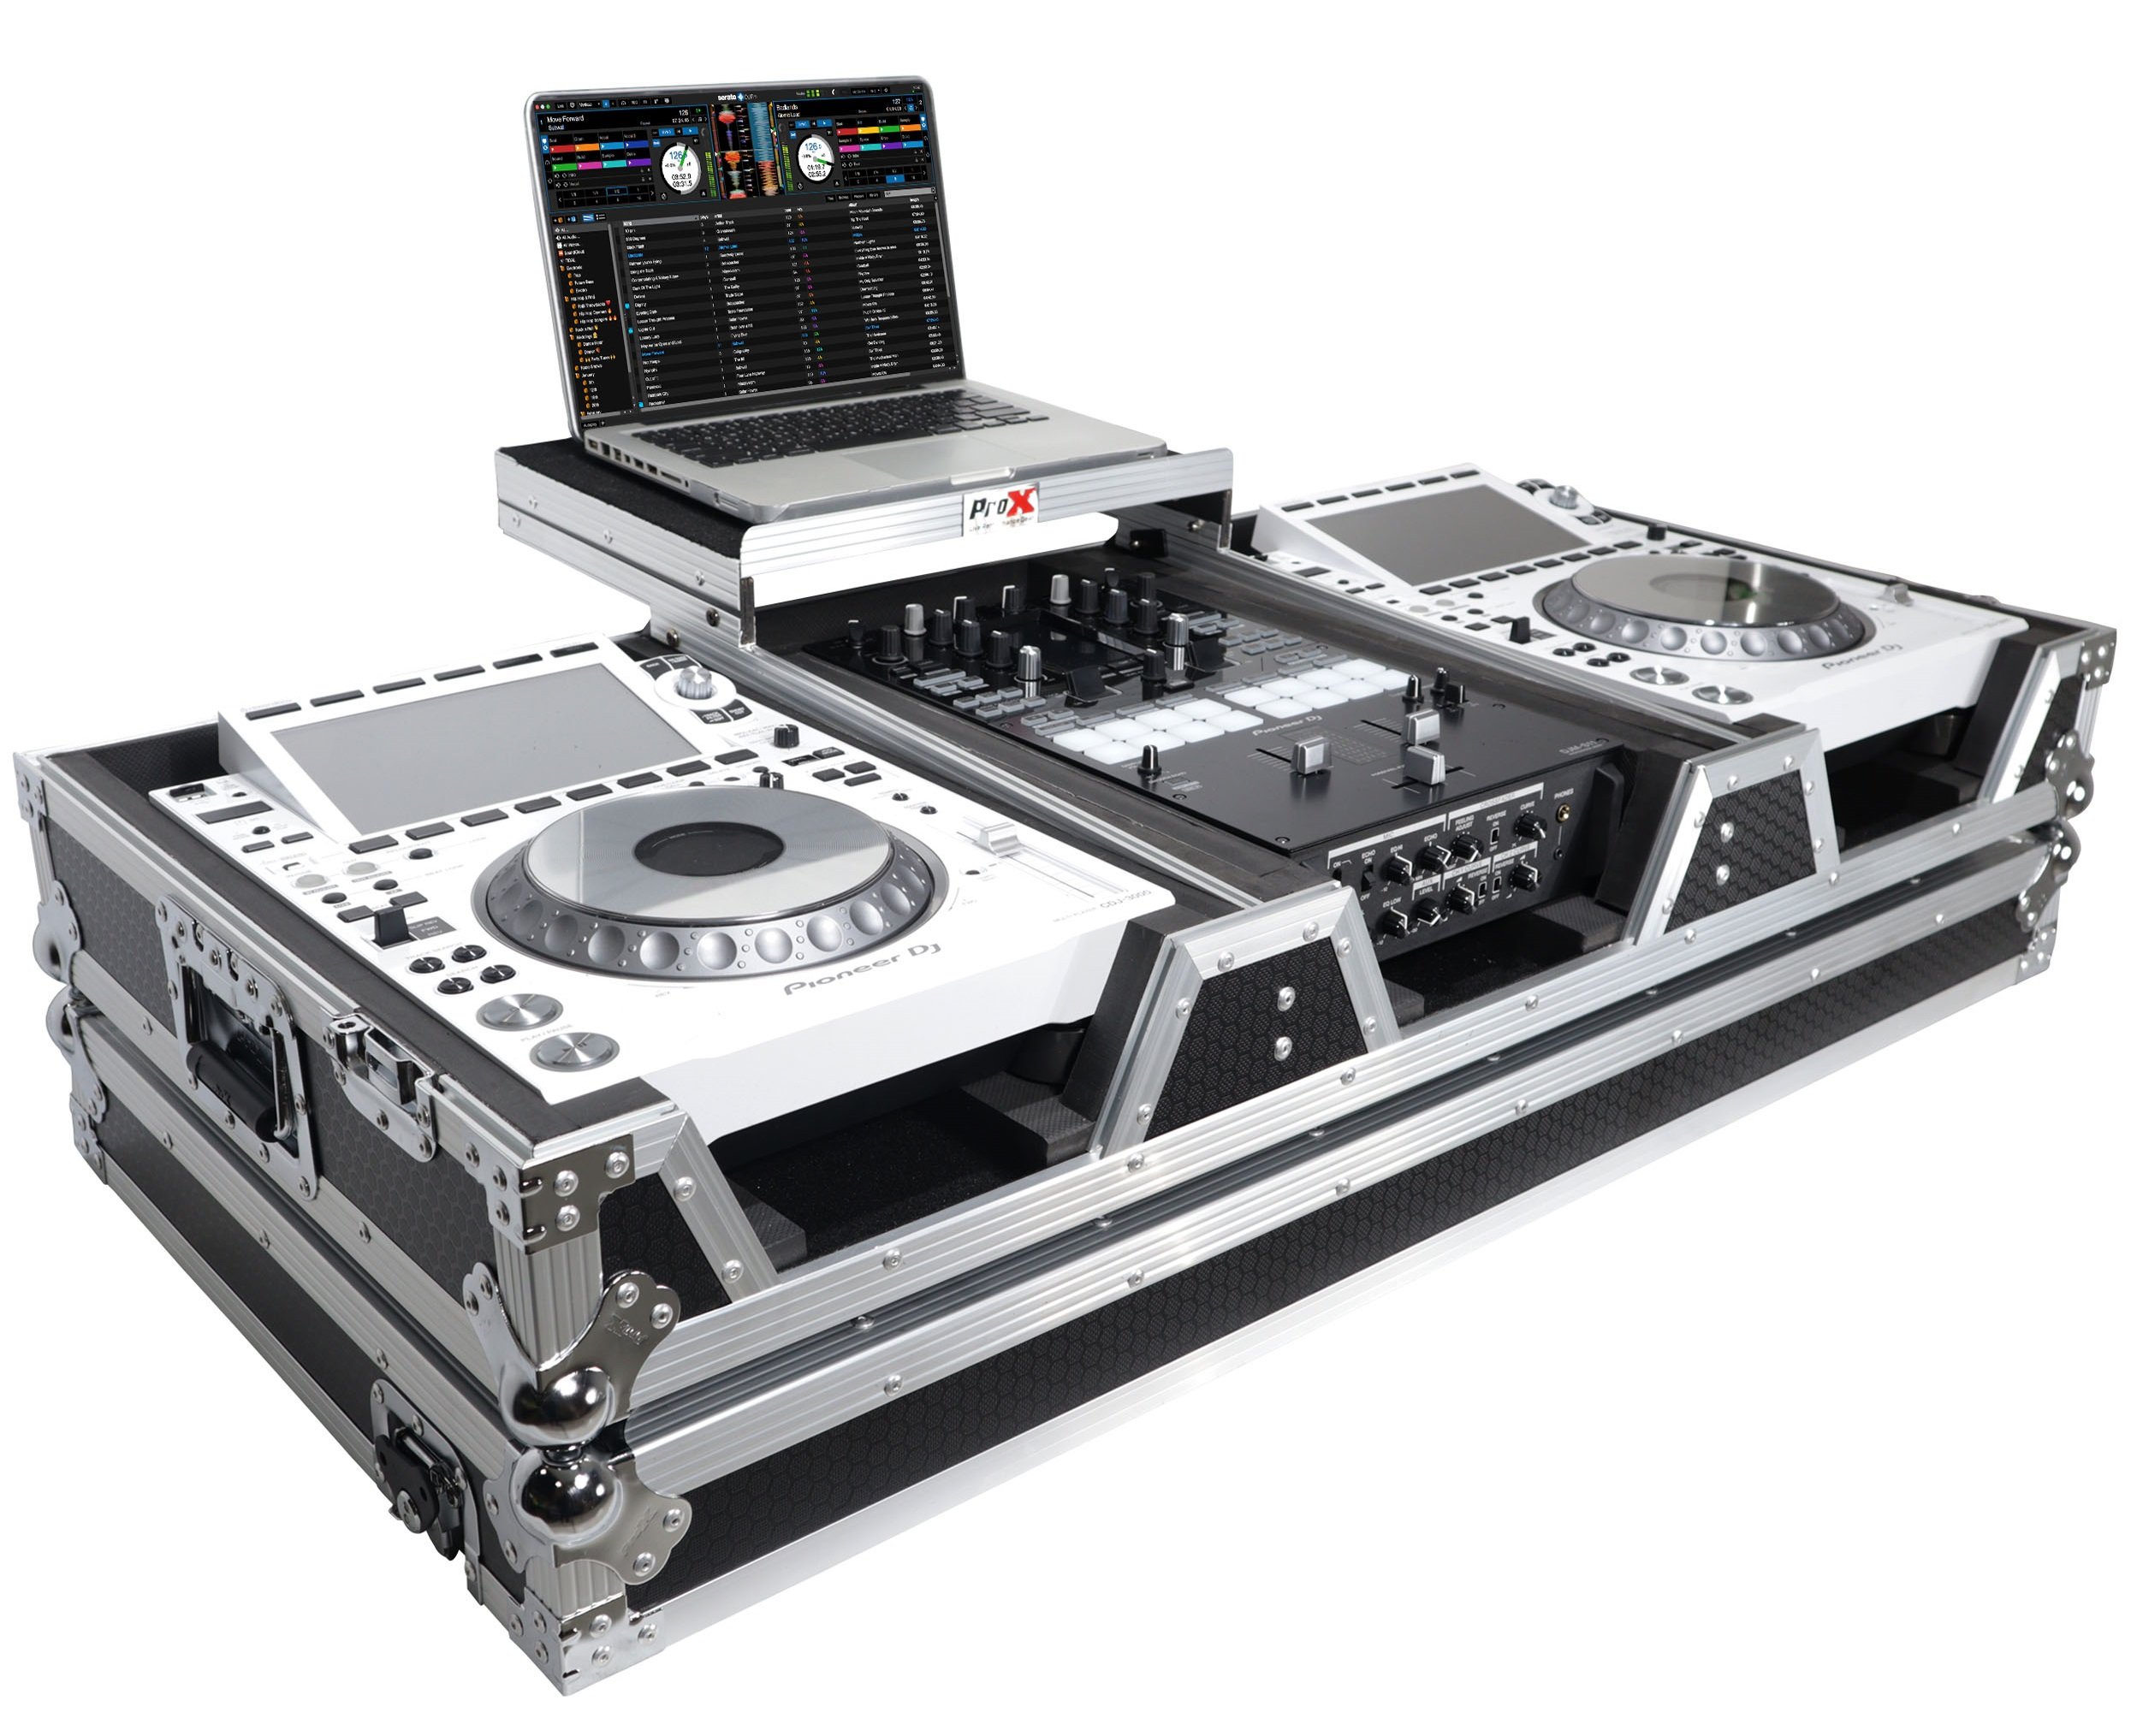 prox-xs-cdm3000wlt--case-for-djm-900nxs2-and-more.jpg